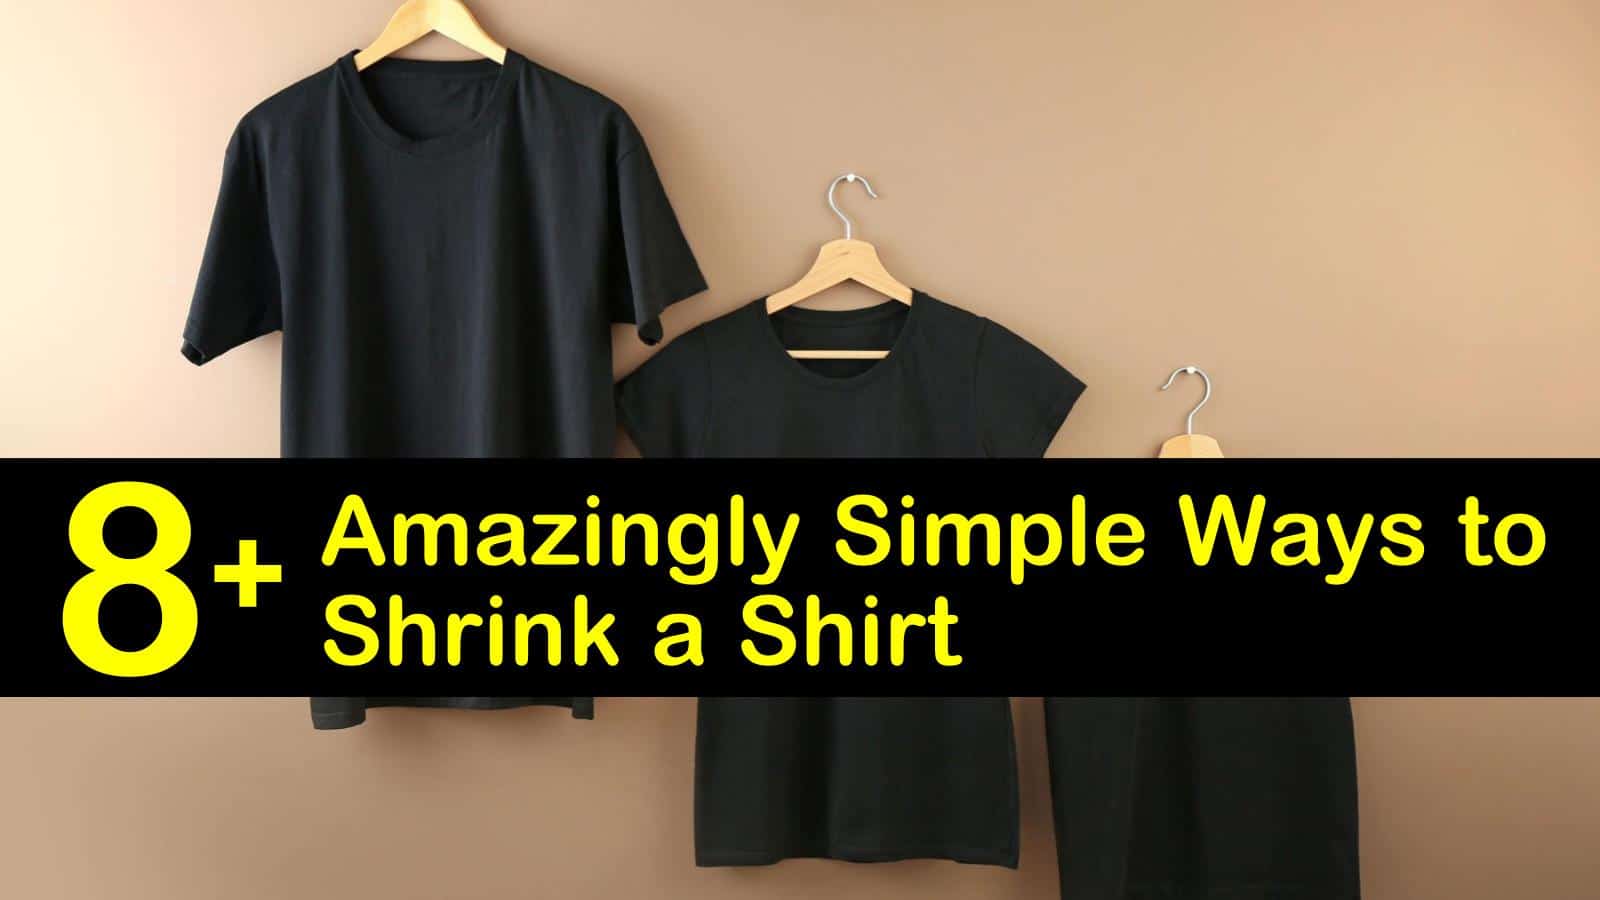 Amazingly to Shrink a Shirt